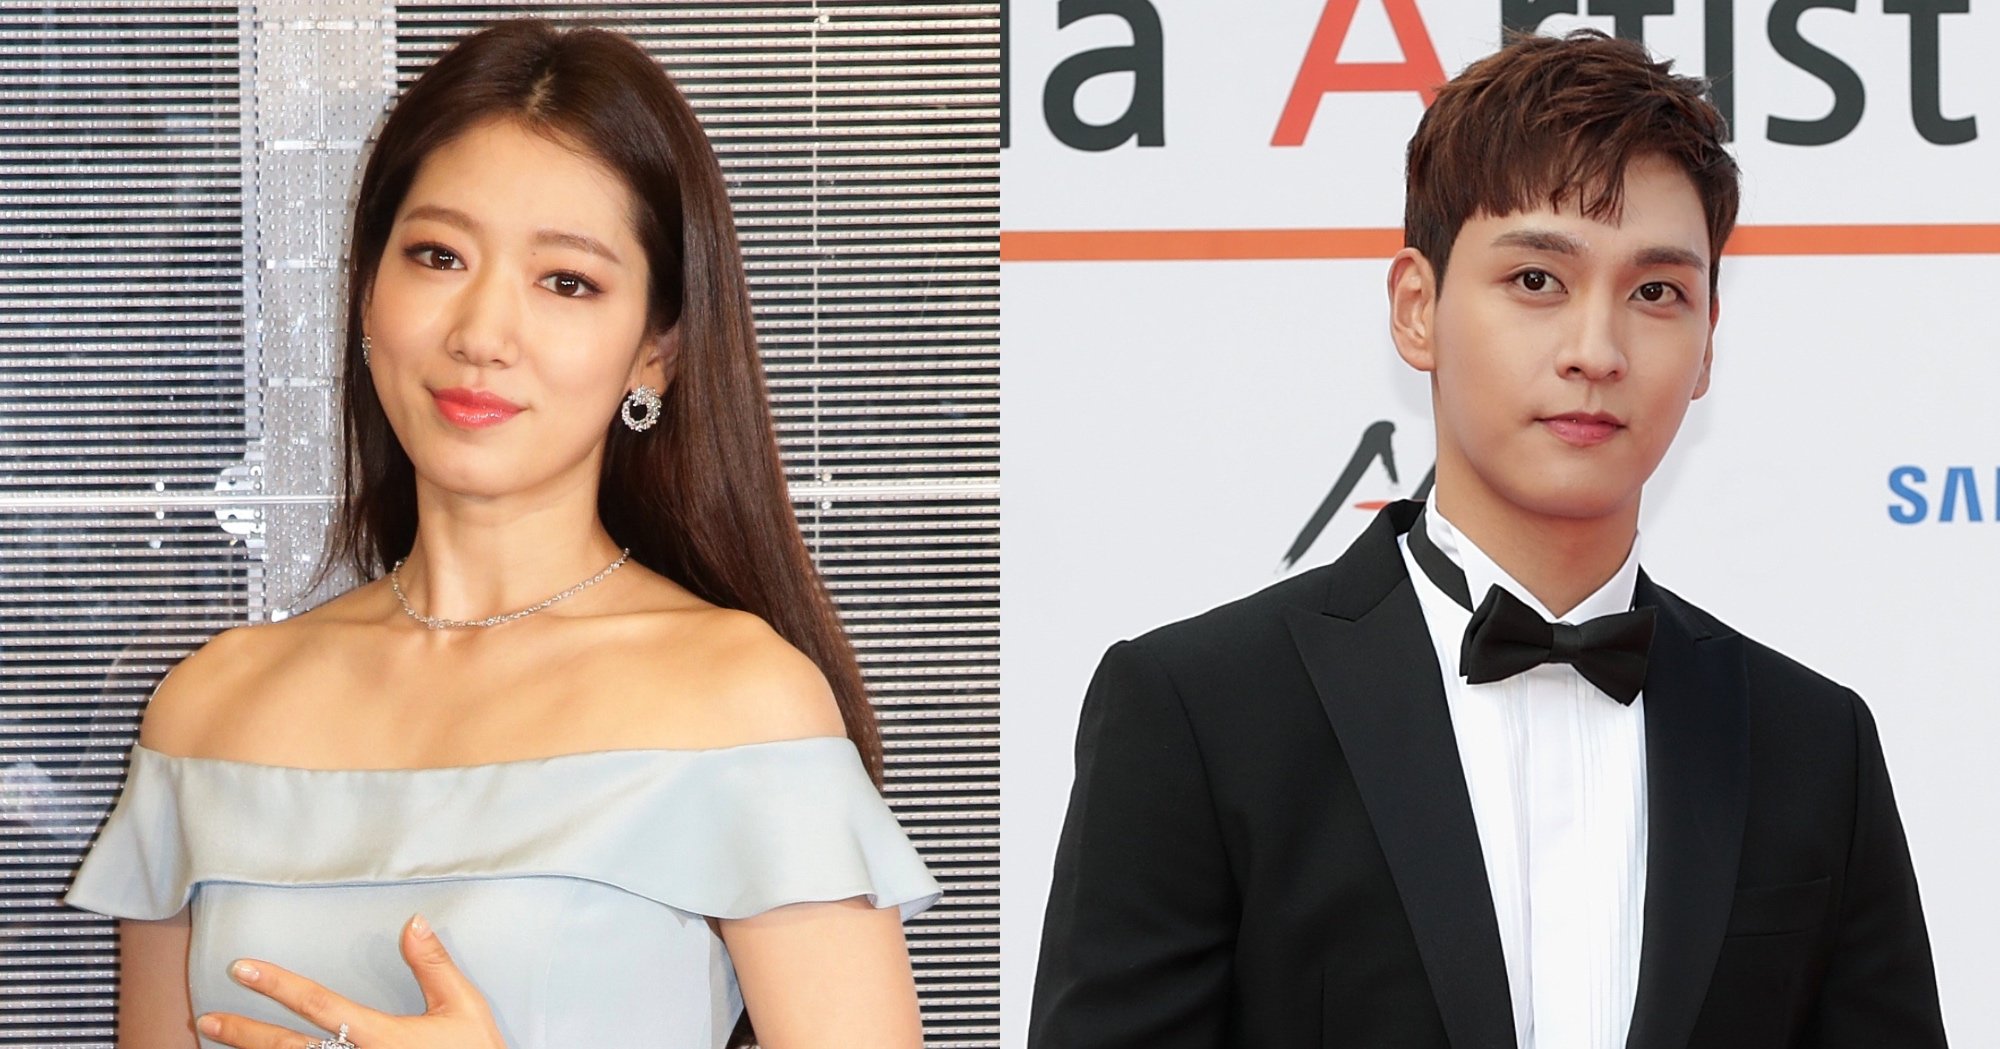 Park Shin-hye and Choi Tae-joon at red carpet events wearing dress and tux.